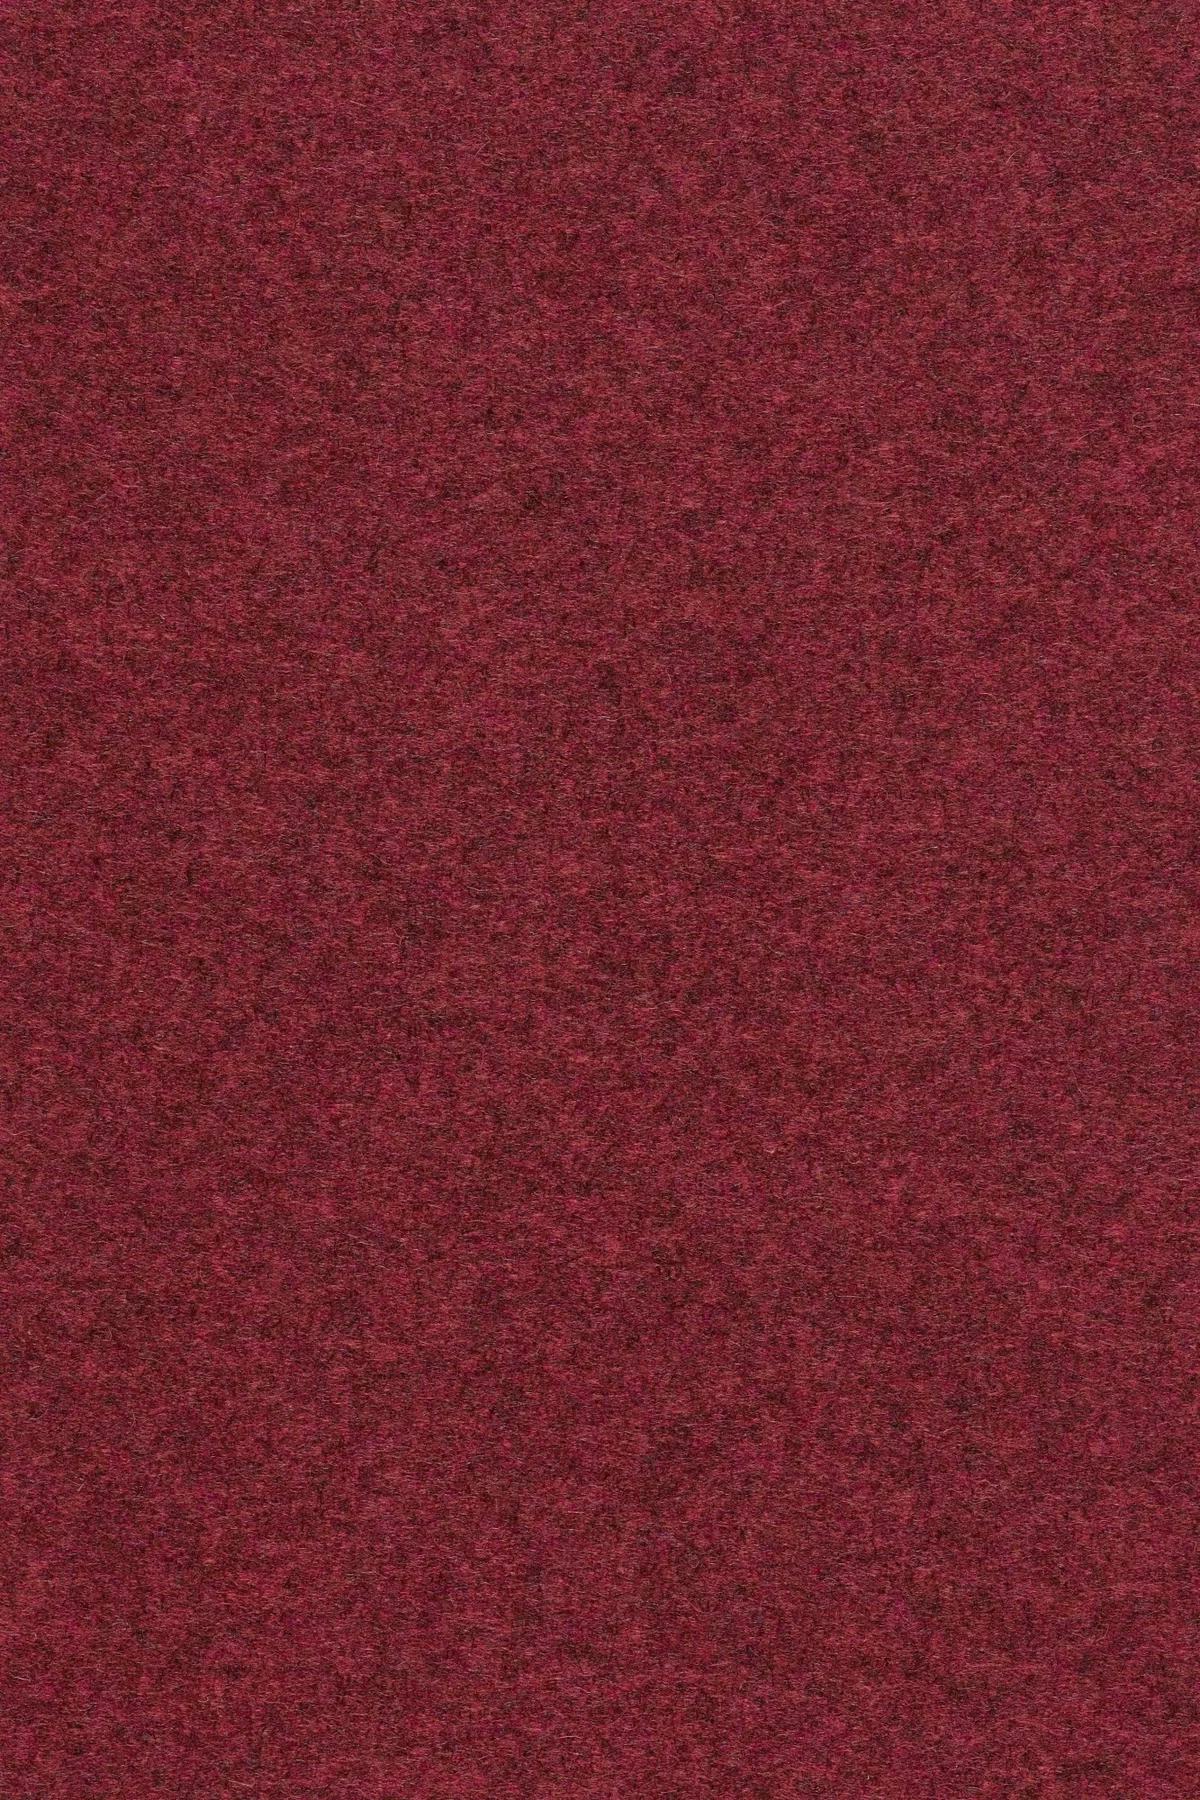 Fabric sample Divina MD 633 red